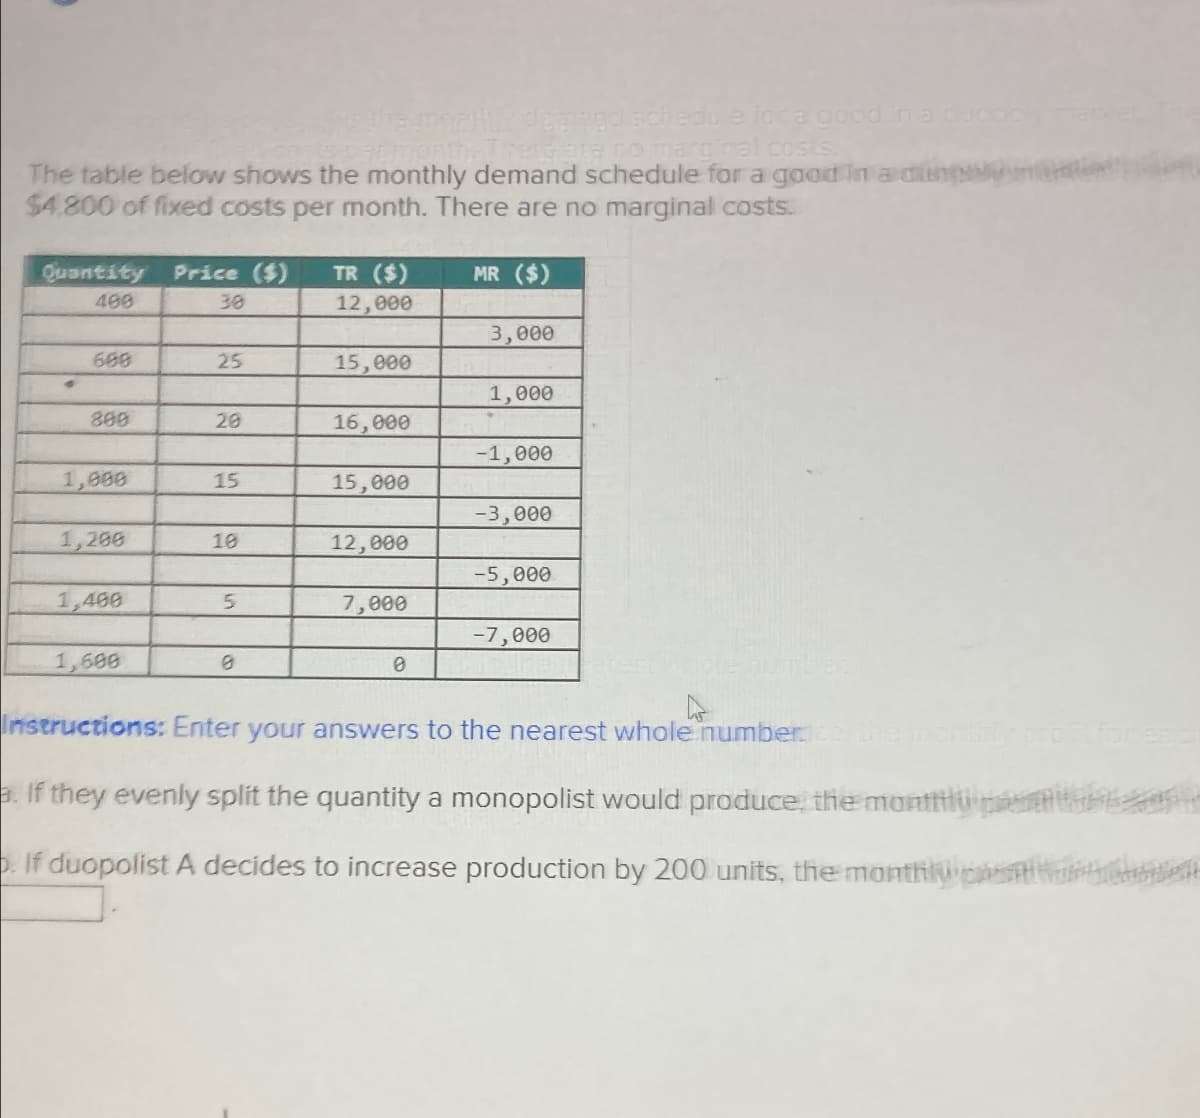 monthly dearmad schedule for a good in a cucocly
Semonth. Tires ara no marginal costs.
The table below shows the monthly demand schedule for a good in a dinne
$4.800 of fixed costs per month. There are no marginal costs.
Quantity
400
Price ($)
30
TR ($)
MR ($)
12,000
3,000
688
25
15,000
•
1,000
800
20
16,000
-1,000
1,000
15
15,000
-3,000
1,286
10
12,000
-5,000
1,400
5
7,000
-7,000
1,688
0
0
Instructions: Enter your answers to the nearest whole number ce, the monthly profit for each
a. If they evenly split the quantity a monopolist would produce, the mantly s
If duopolist A decides to increase production by 200 units, the monthly p